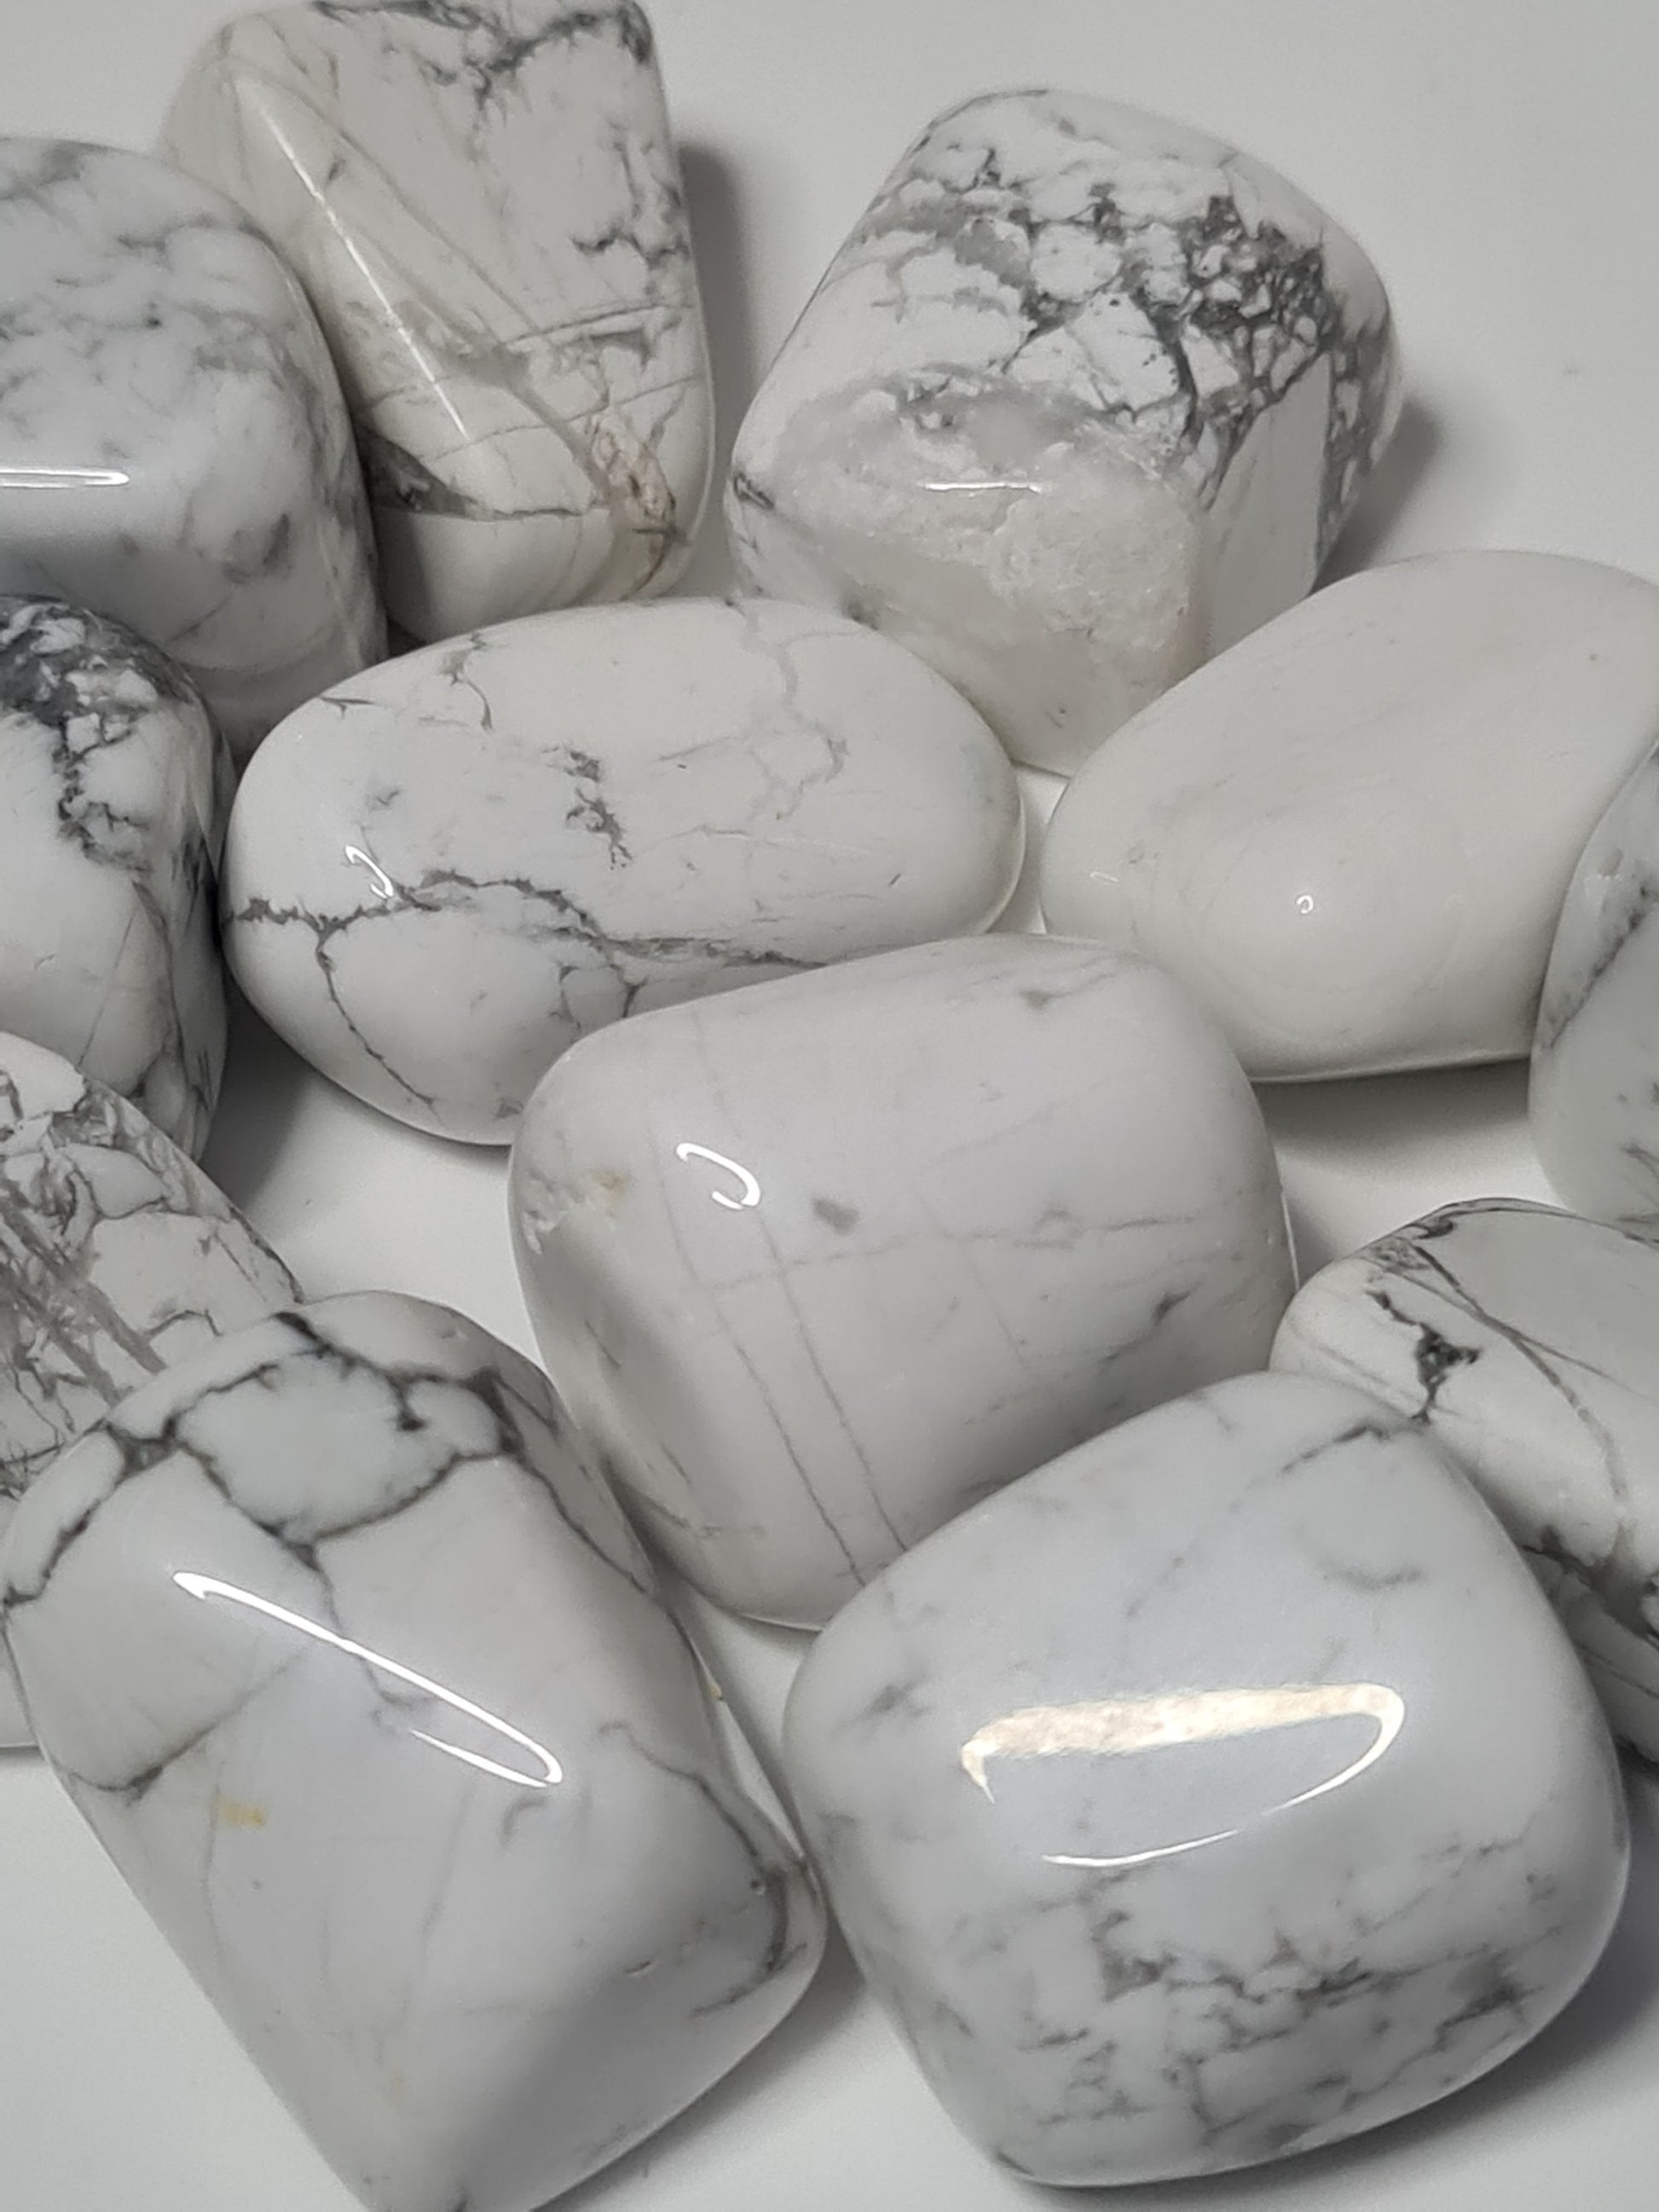 Beautiful bright white howlite tumbles with grey marbling